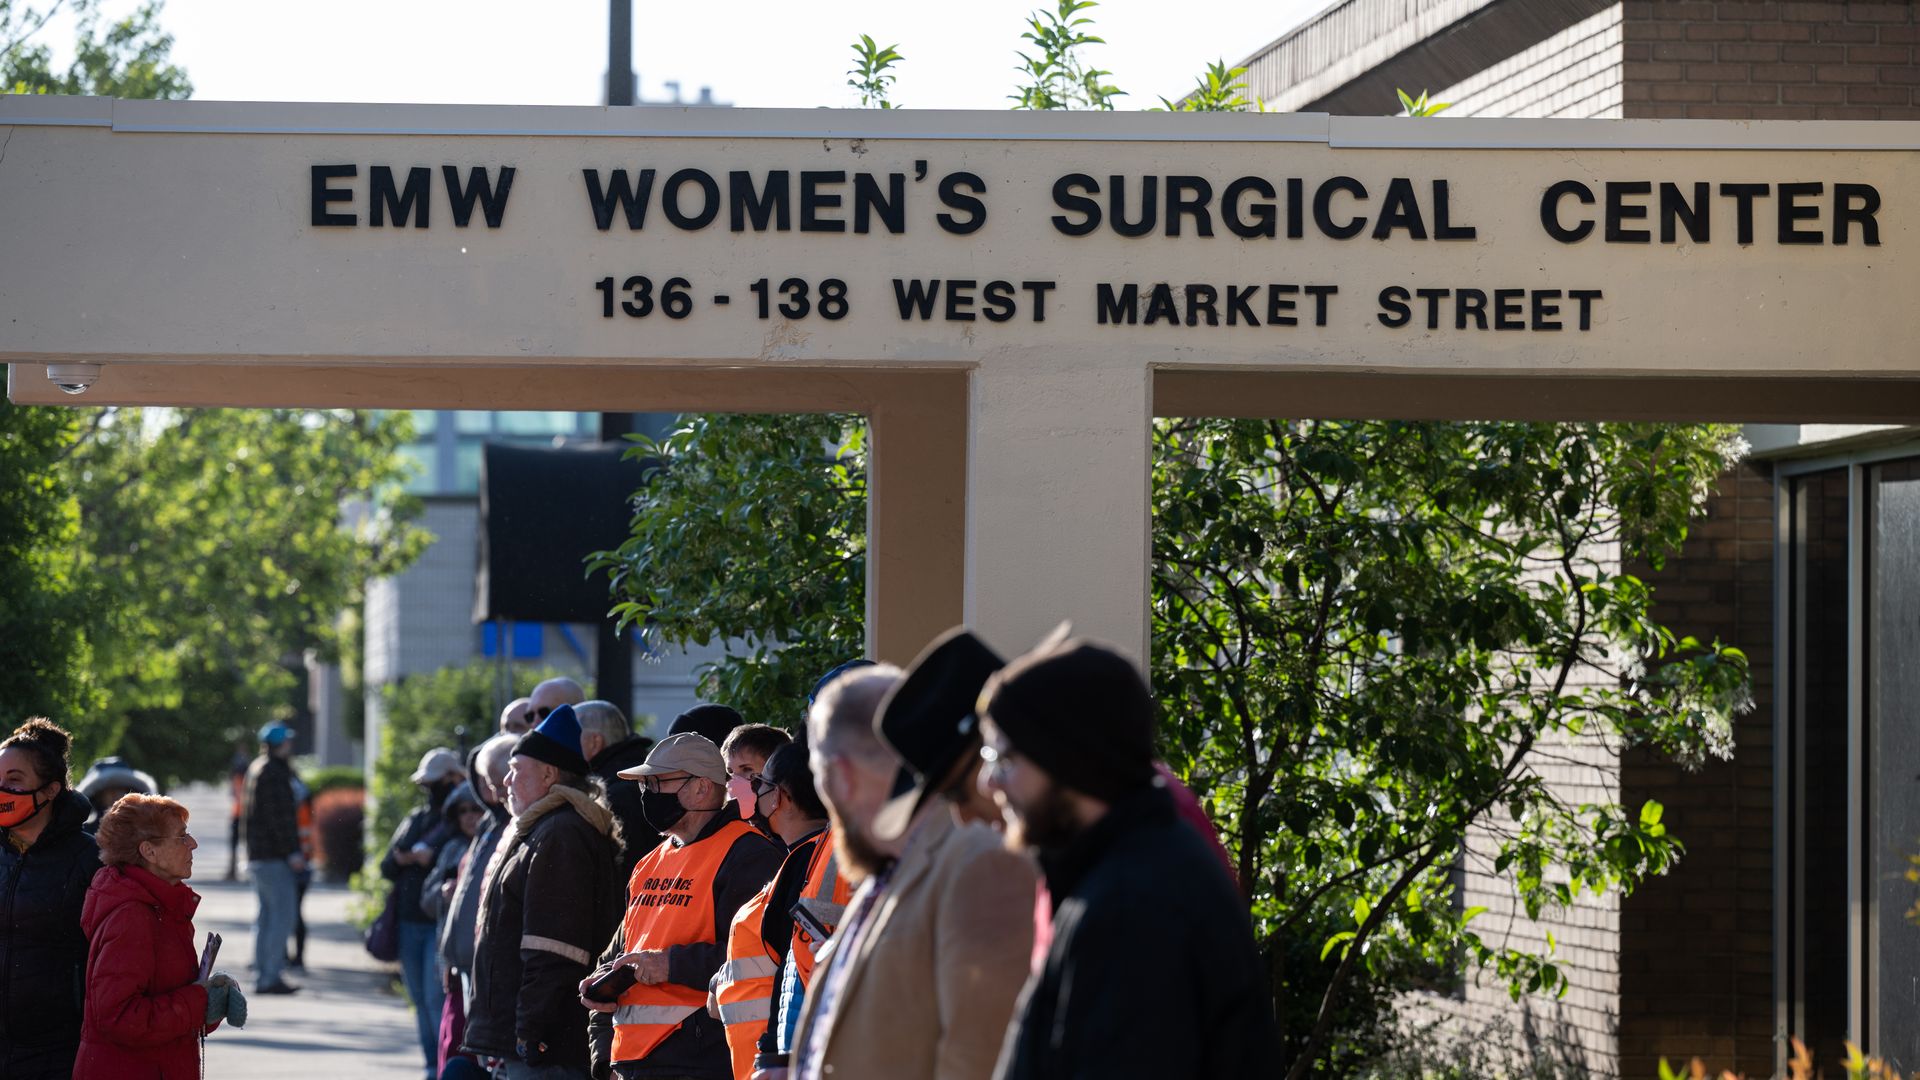 Photo of people lined up in front of an EMW Women's Surgical Center